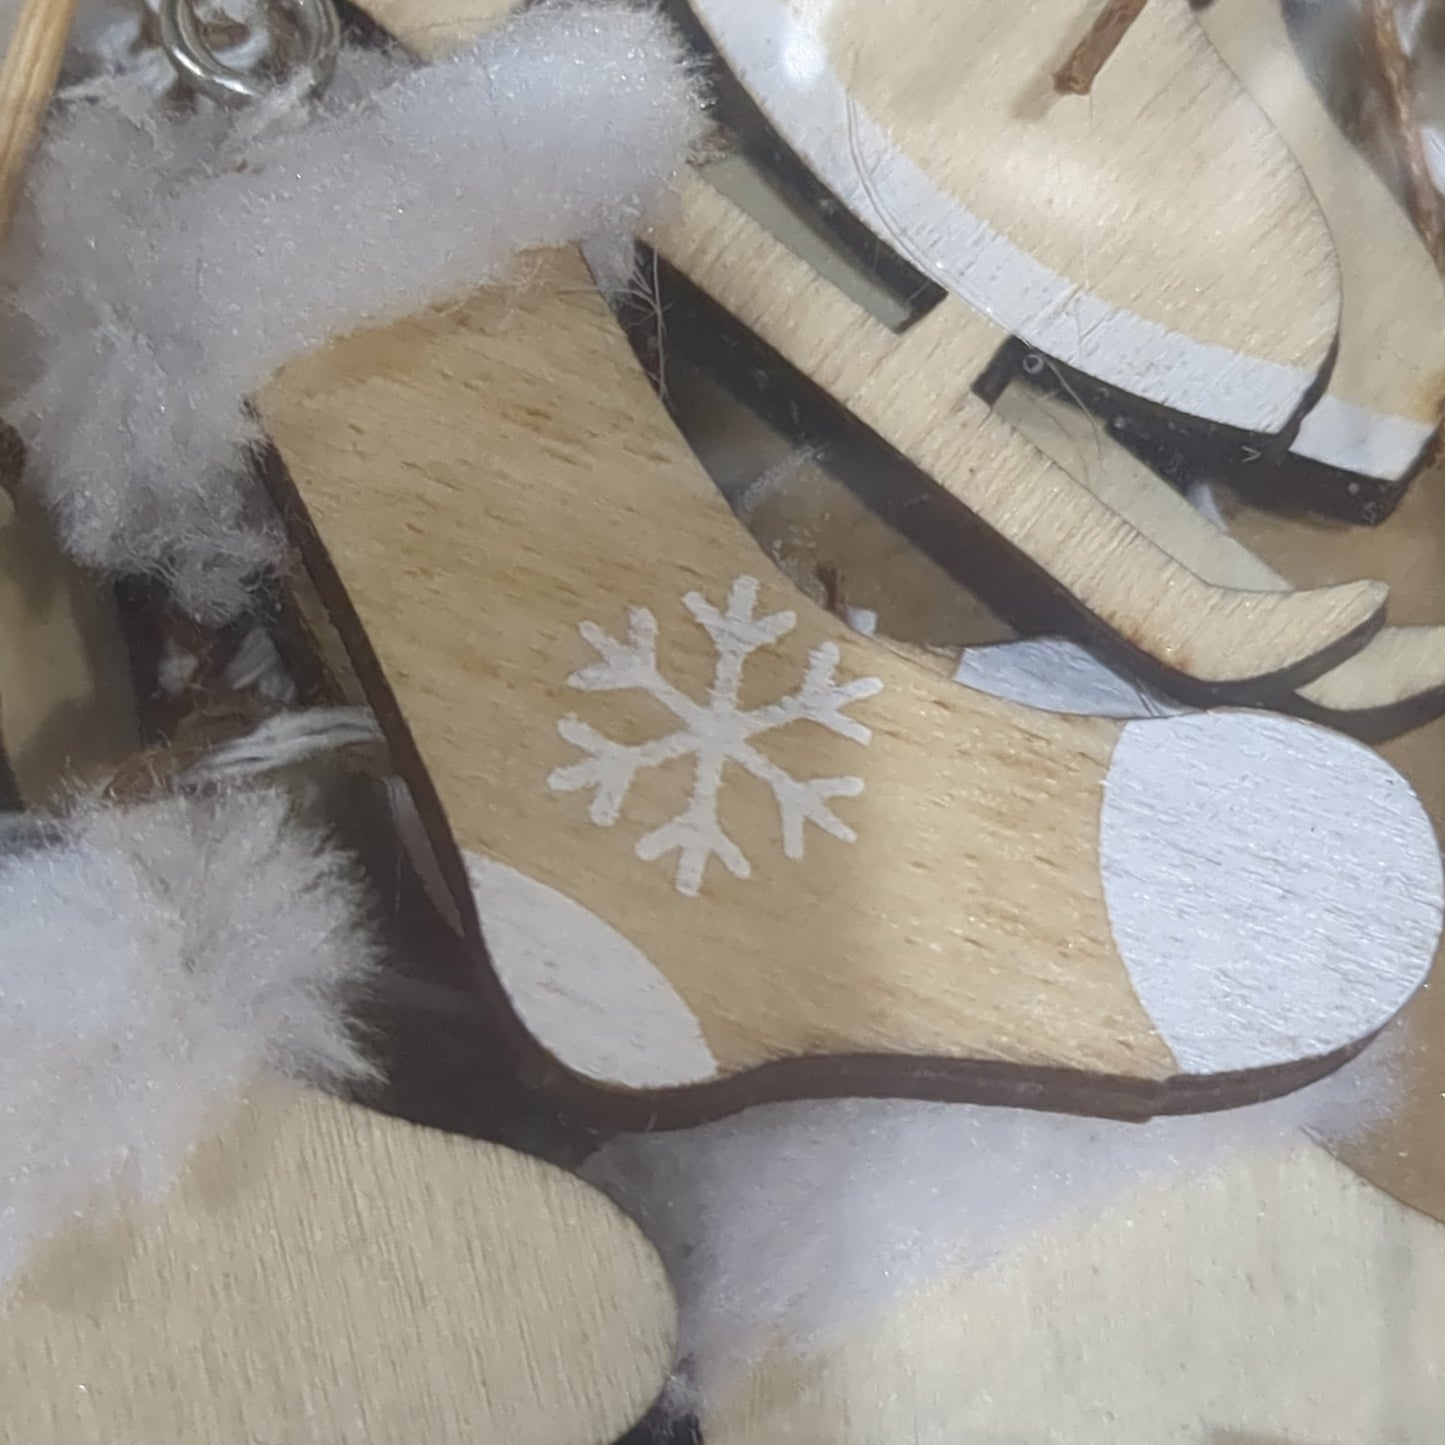 Set of 6 white and natural wood ornaments, skis, sled, skates, mittens, etc. 2-3in